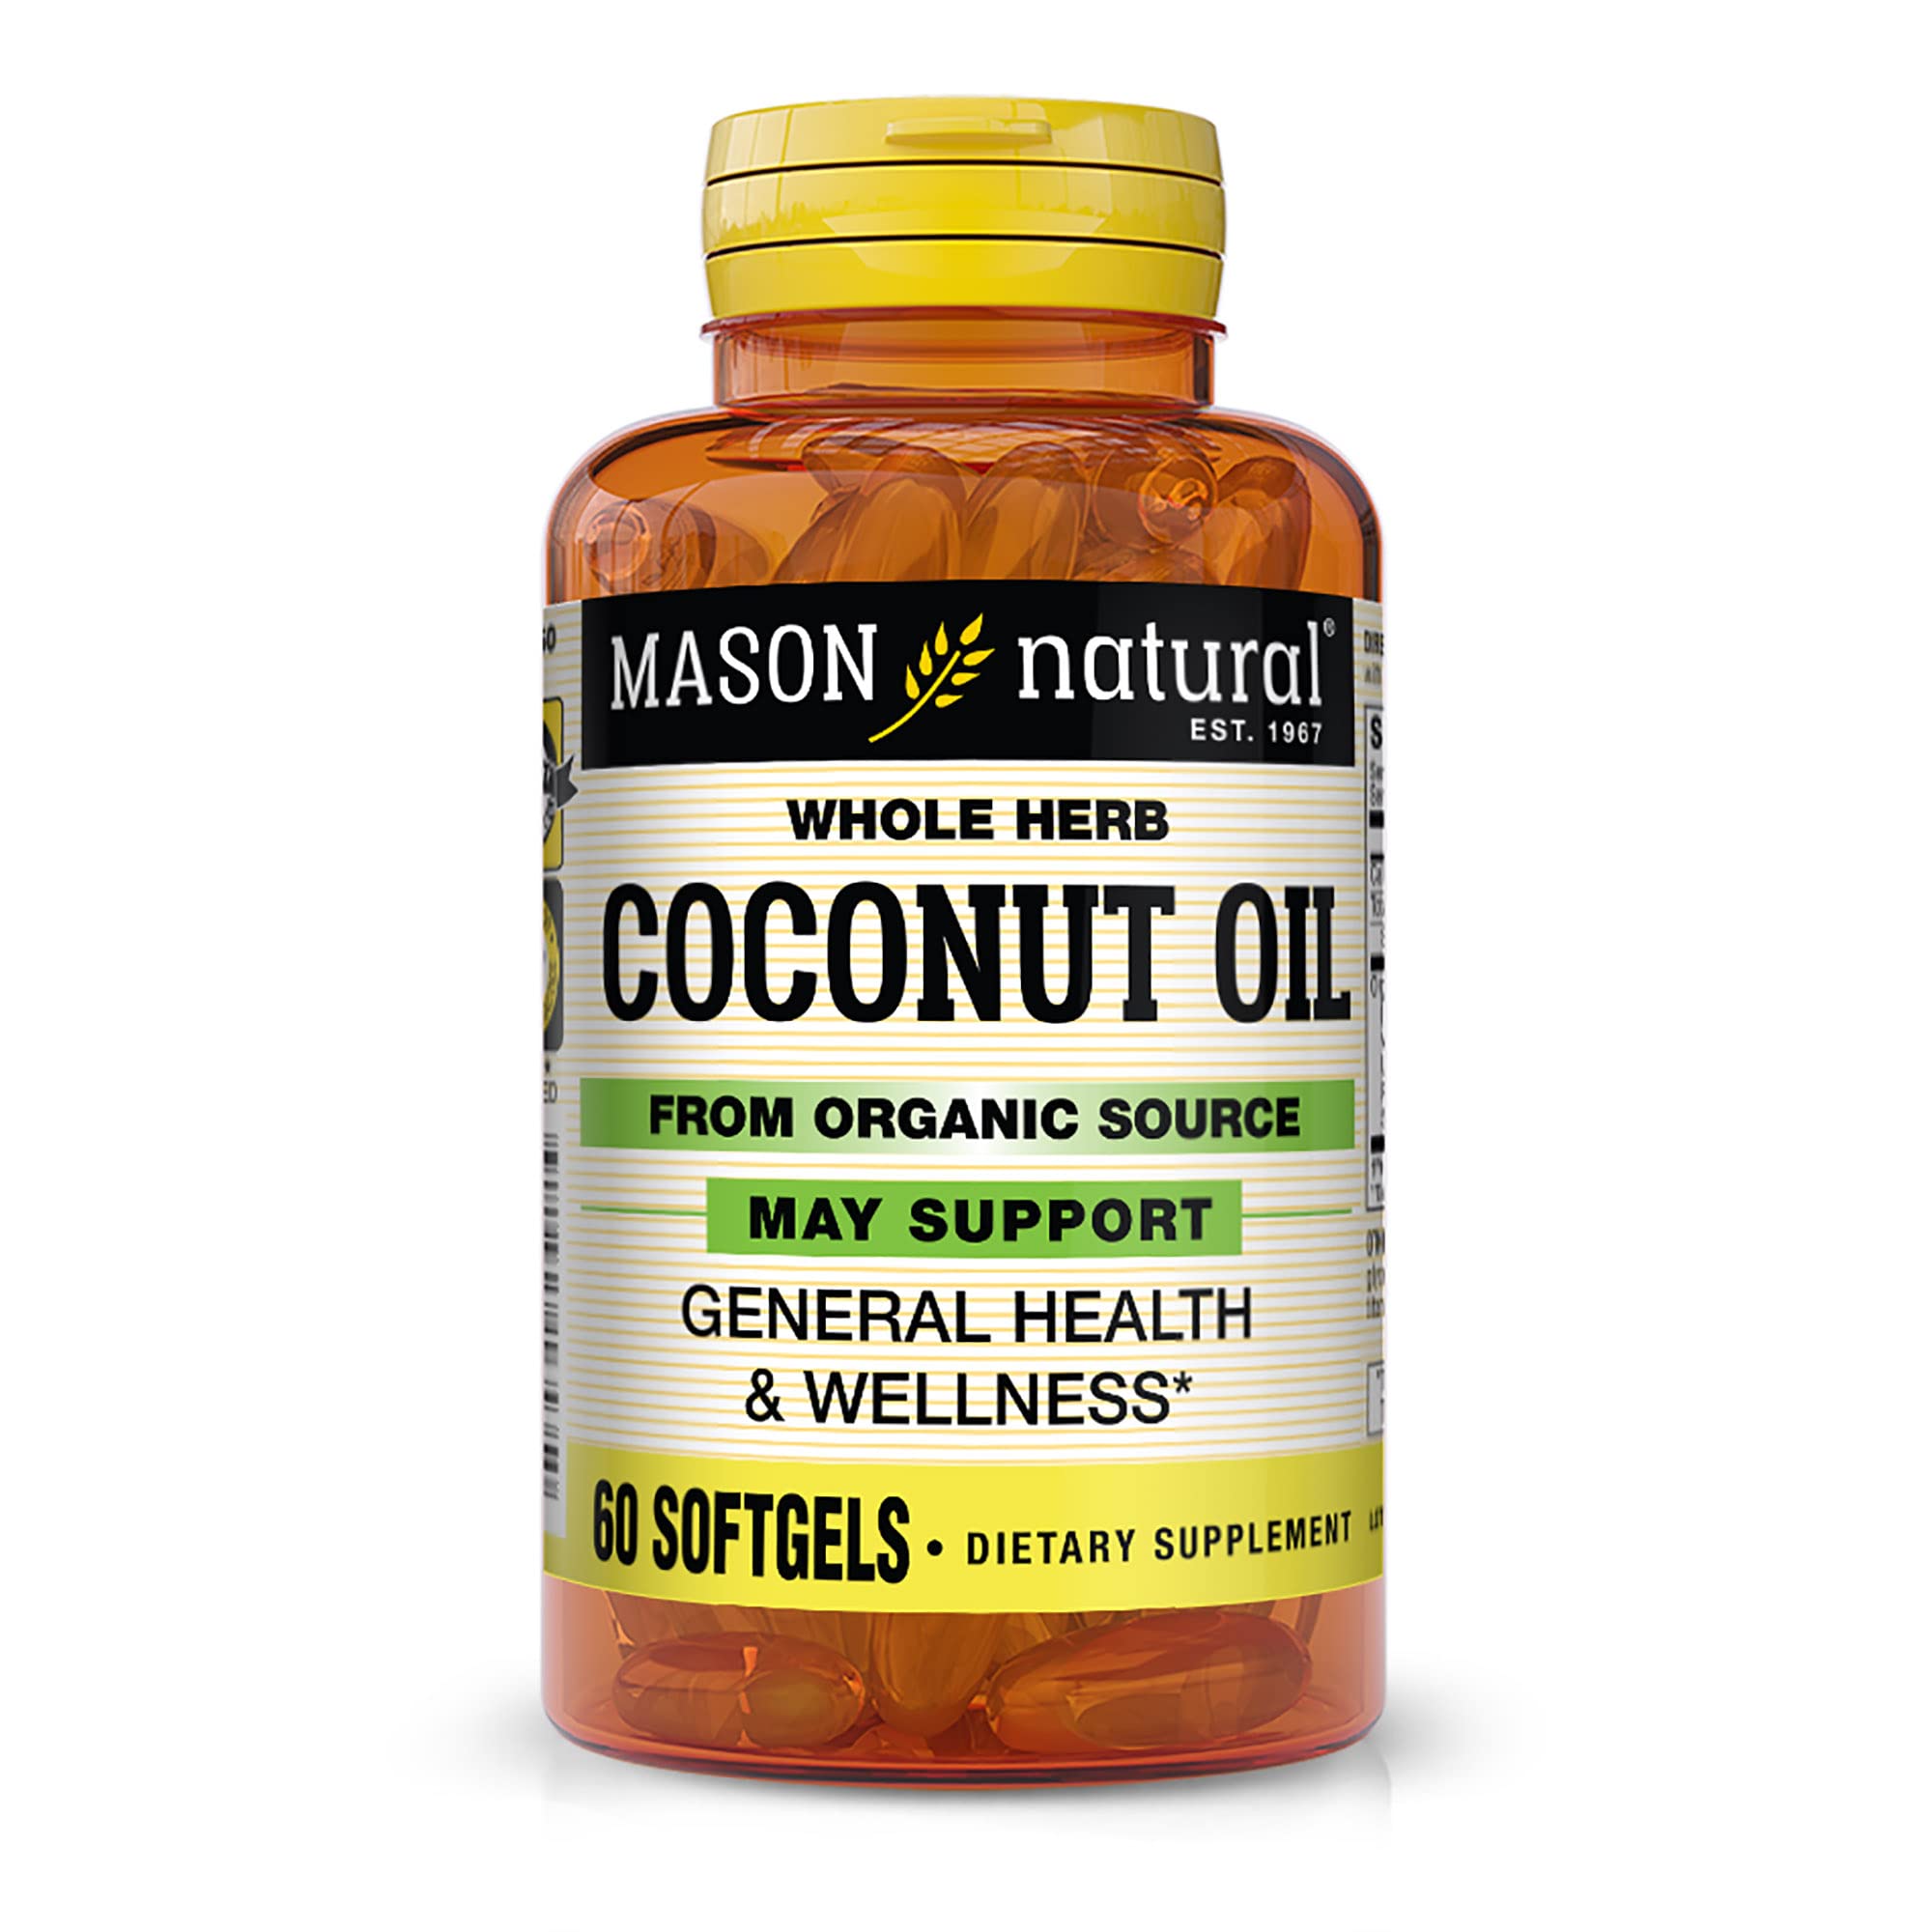 MASON NATURAL Coconut Oil - Supports General Health and Wellness, Improves Heart and Brain Function, Organic Herbal Supplement, 60 Softgels